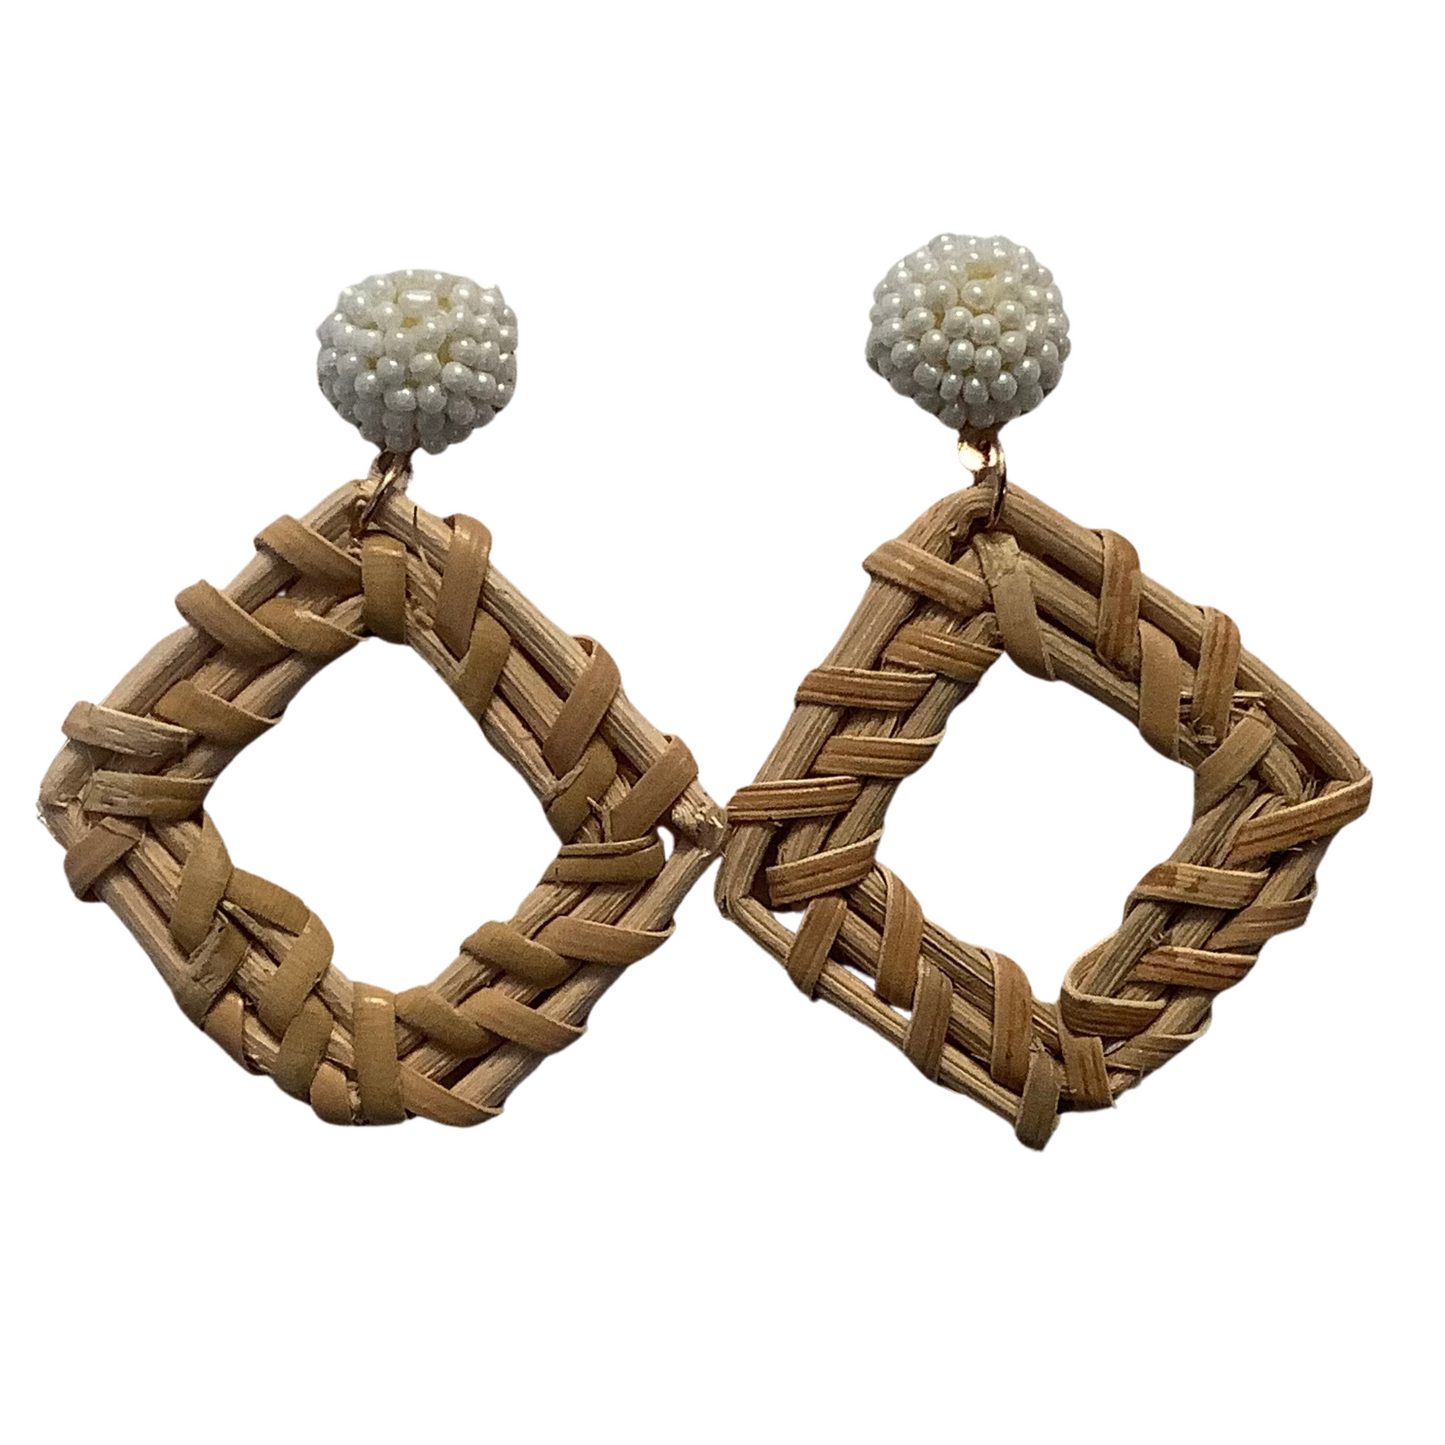 Diamond shaped wood wrapped earrings with white bead accents